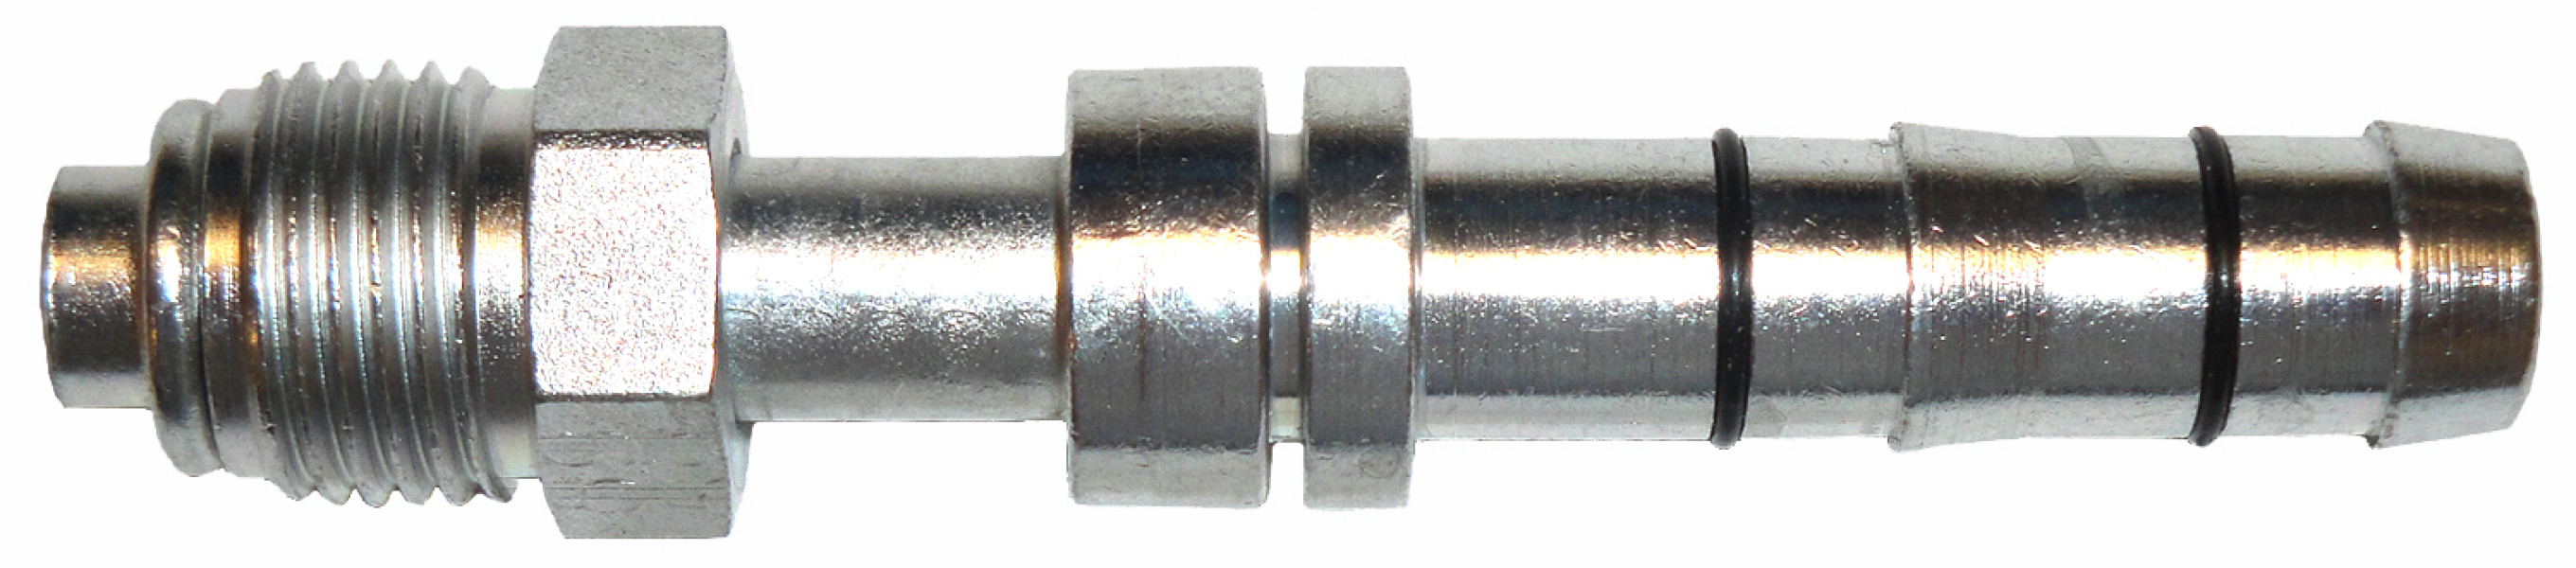 Image of A/C Refrigerant Hose Fitting from Sunair. Part number: FF14198